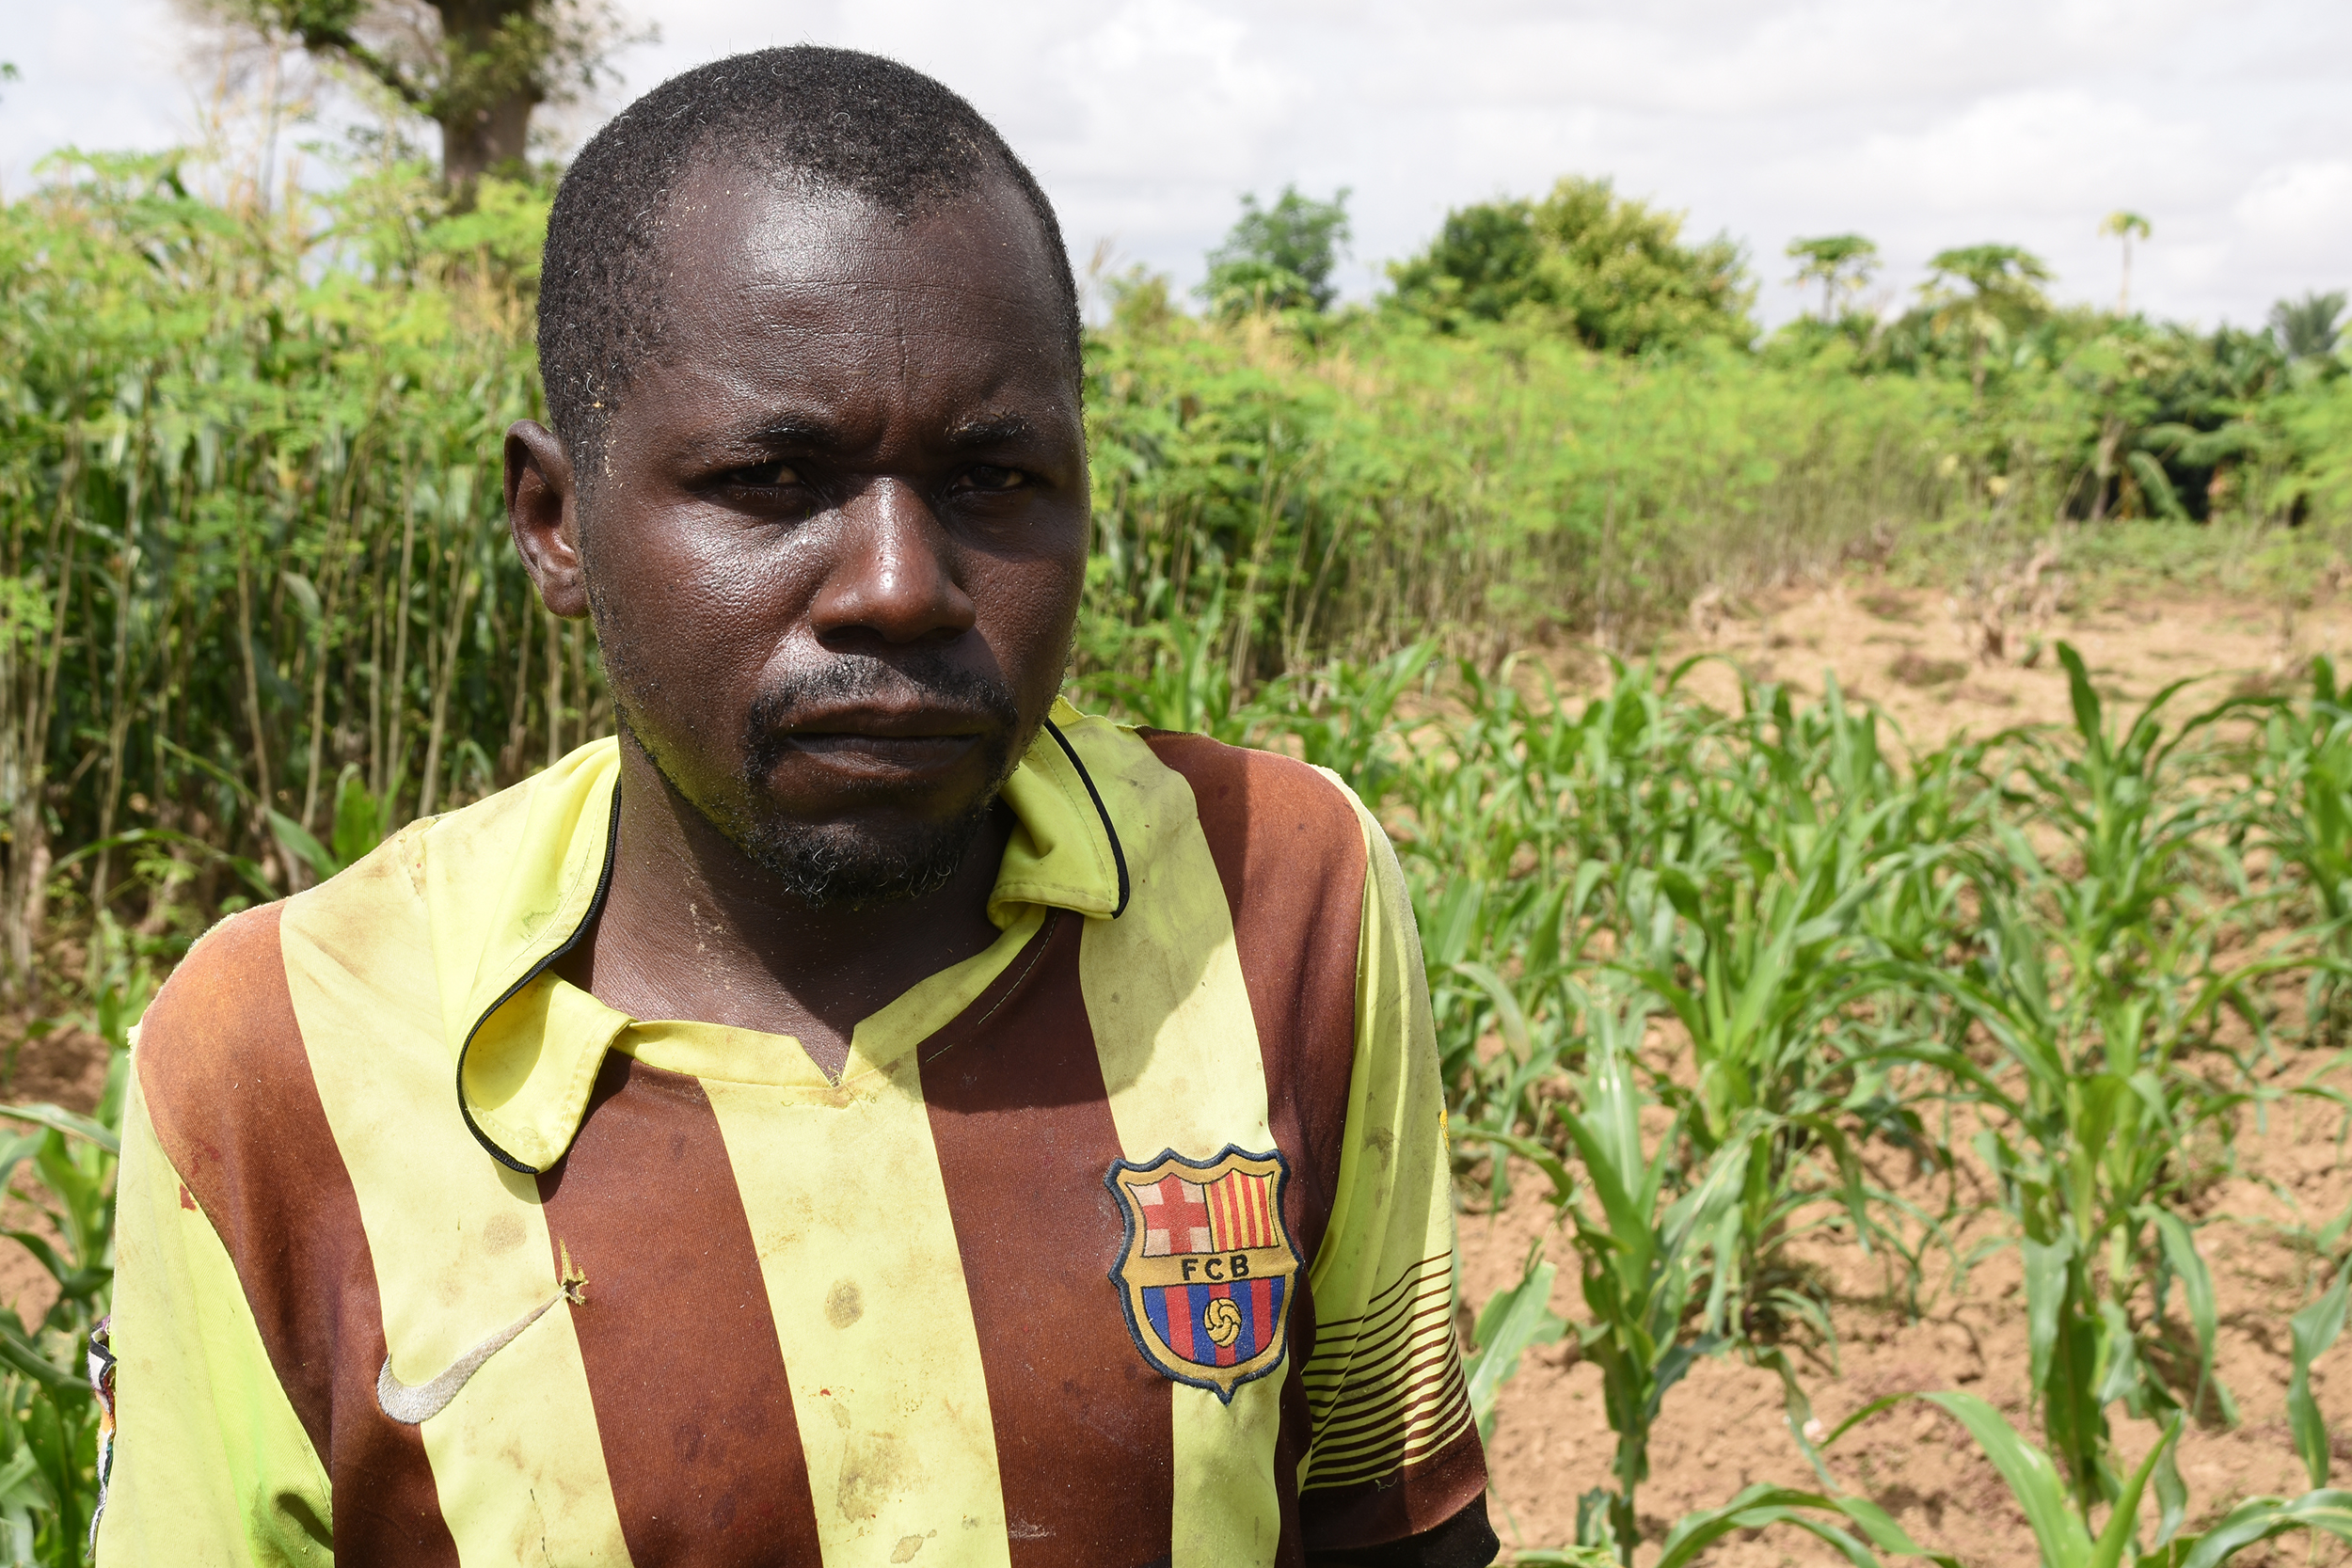  A farmer near Maradi, Niger is very worried about the fall armyworm. His maize field is infested and he has lost most of his crop. He says spraying pesticides does not have much affect. 